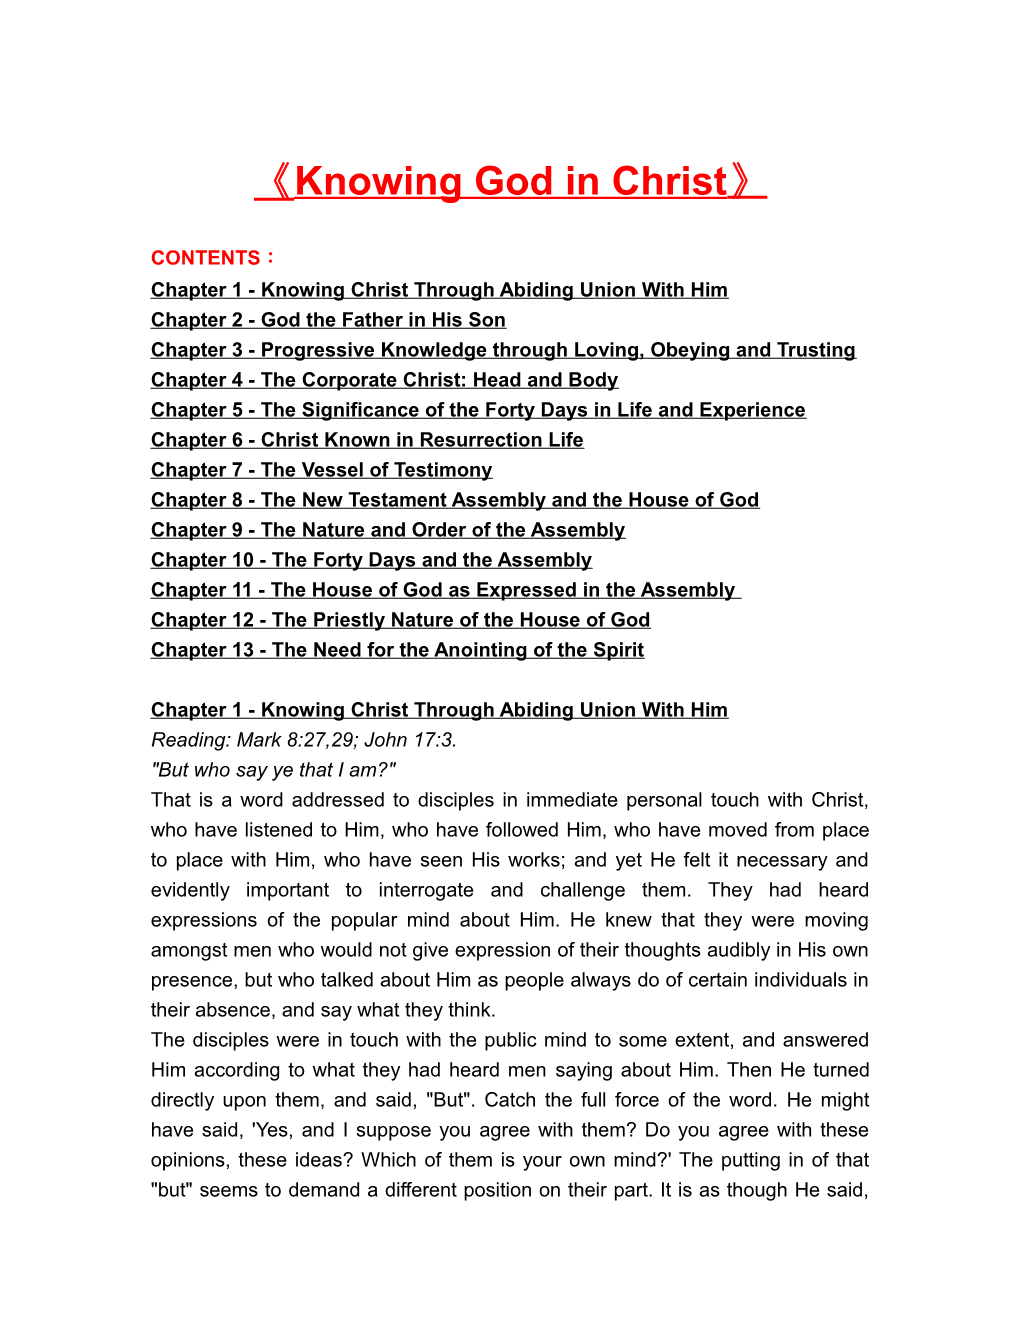 Chapter 1 - Knowing Christ Through Abiding Union with Him